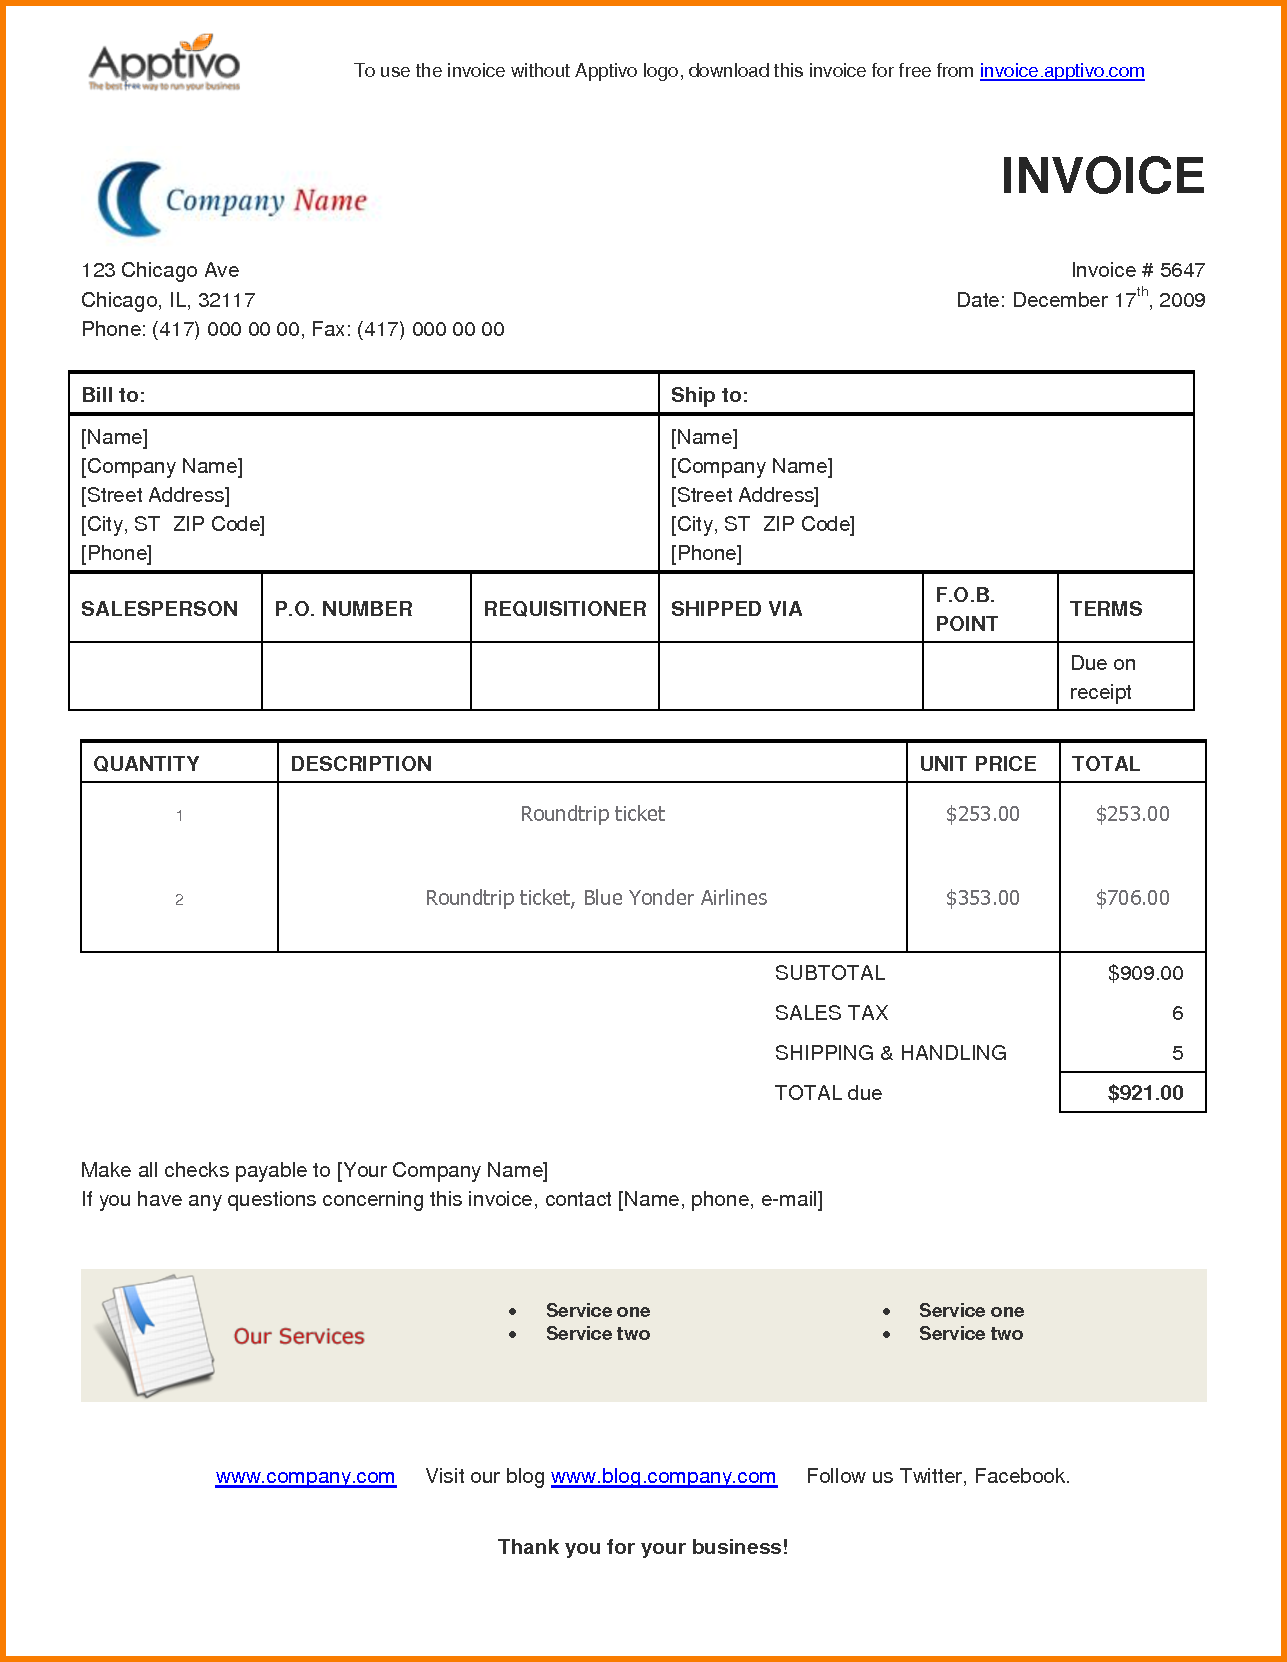 invoice-templates-for-microsoft-word-spreadsheet-templates-for-business